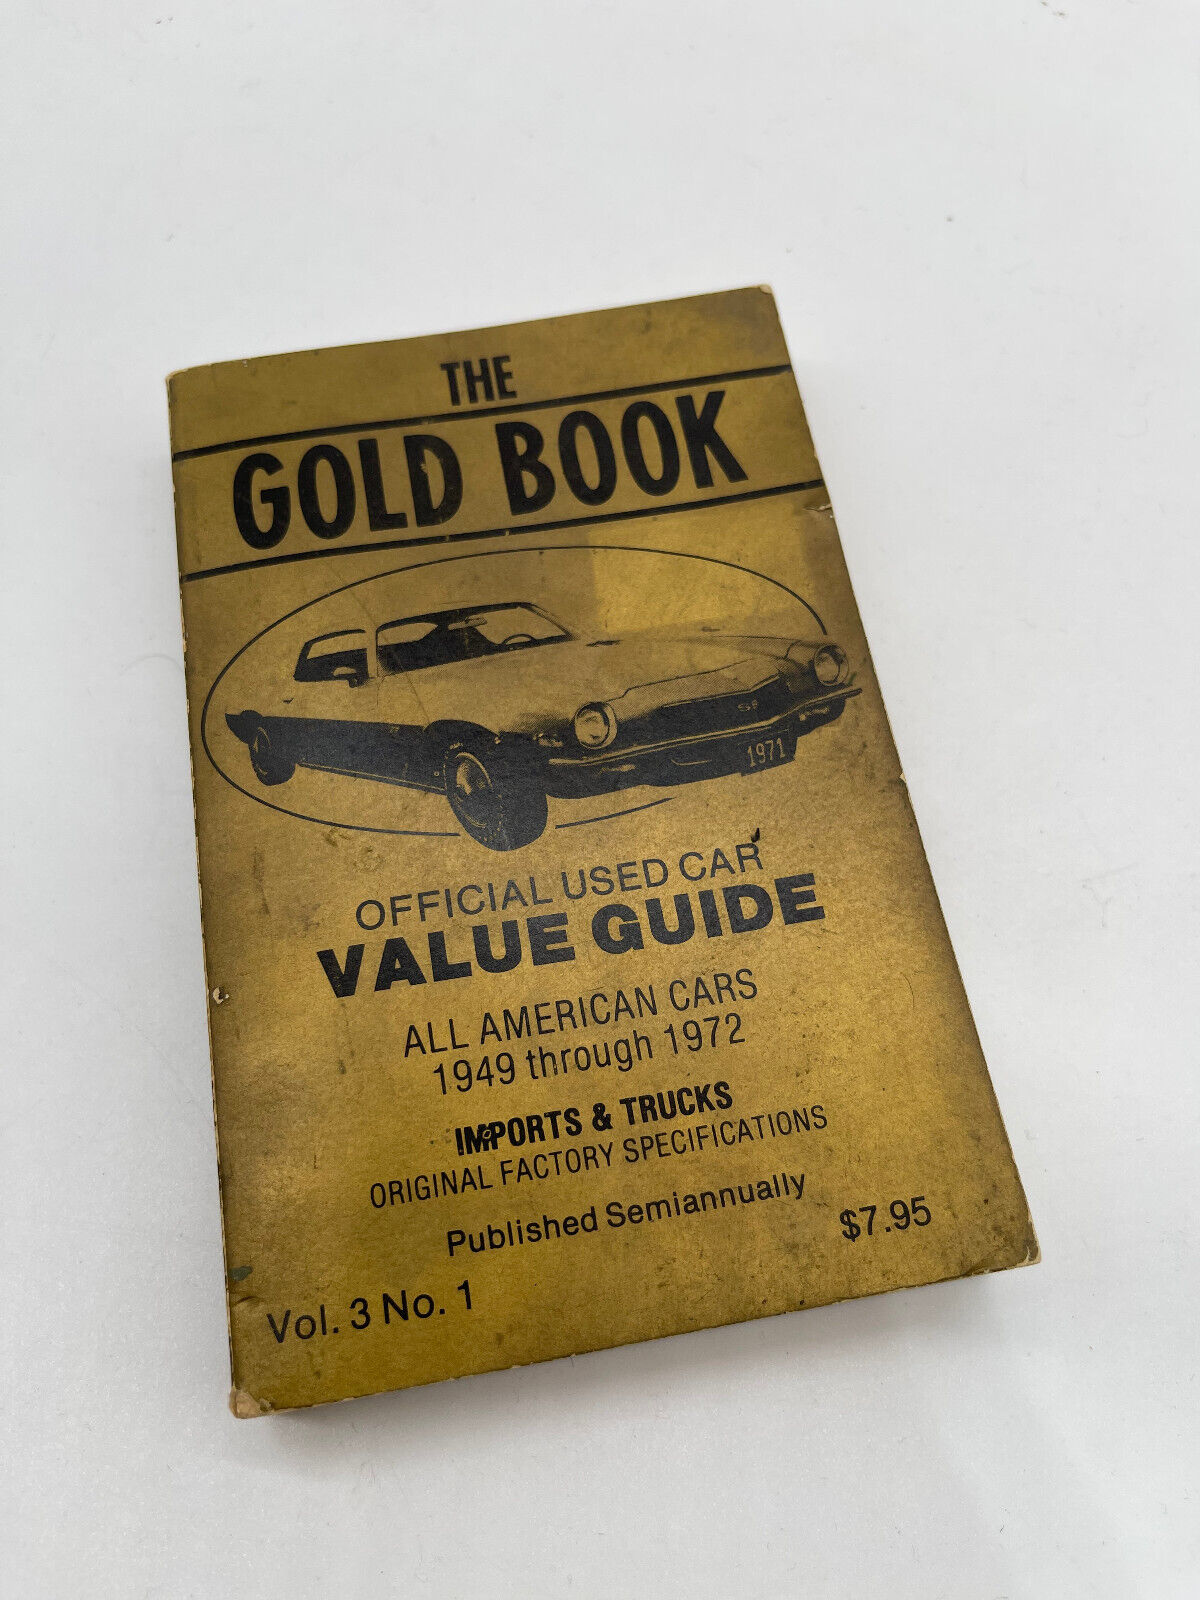 1949-1972 THE GOLD BOOK OFFICIAL USED CAR VALUE GUIDE